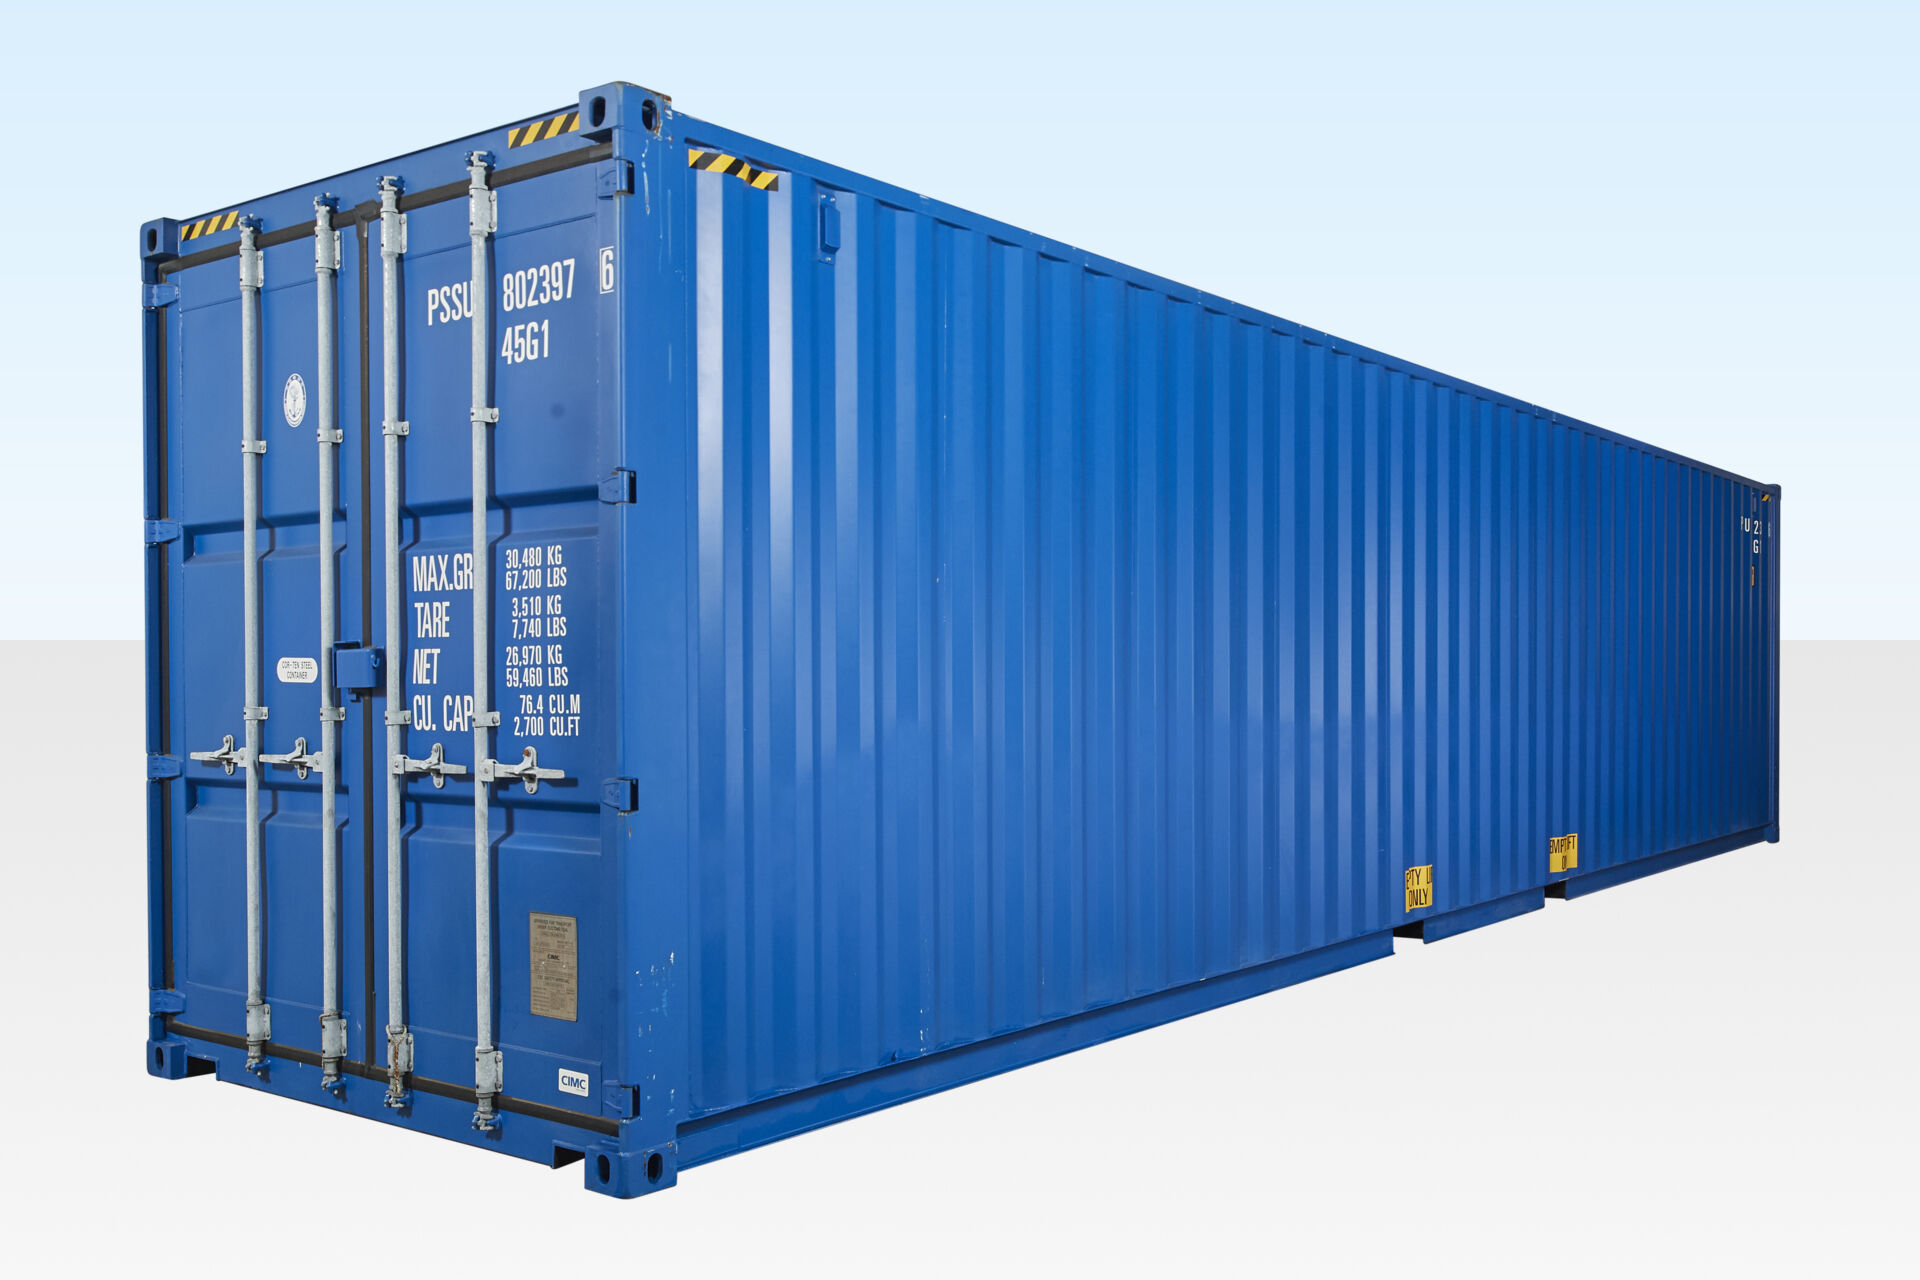 BUY 40FT HIGH CUBE CONTAINER – ONE TRIP (9FT 6″ HIGH) AT WWW.HELLOCONTAINERS.COM